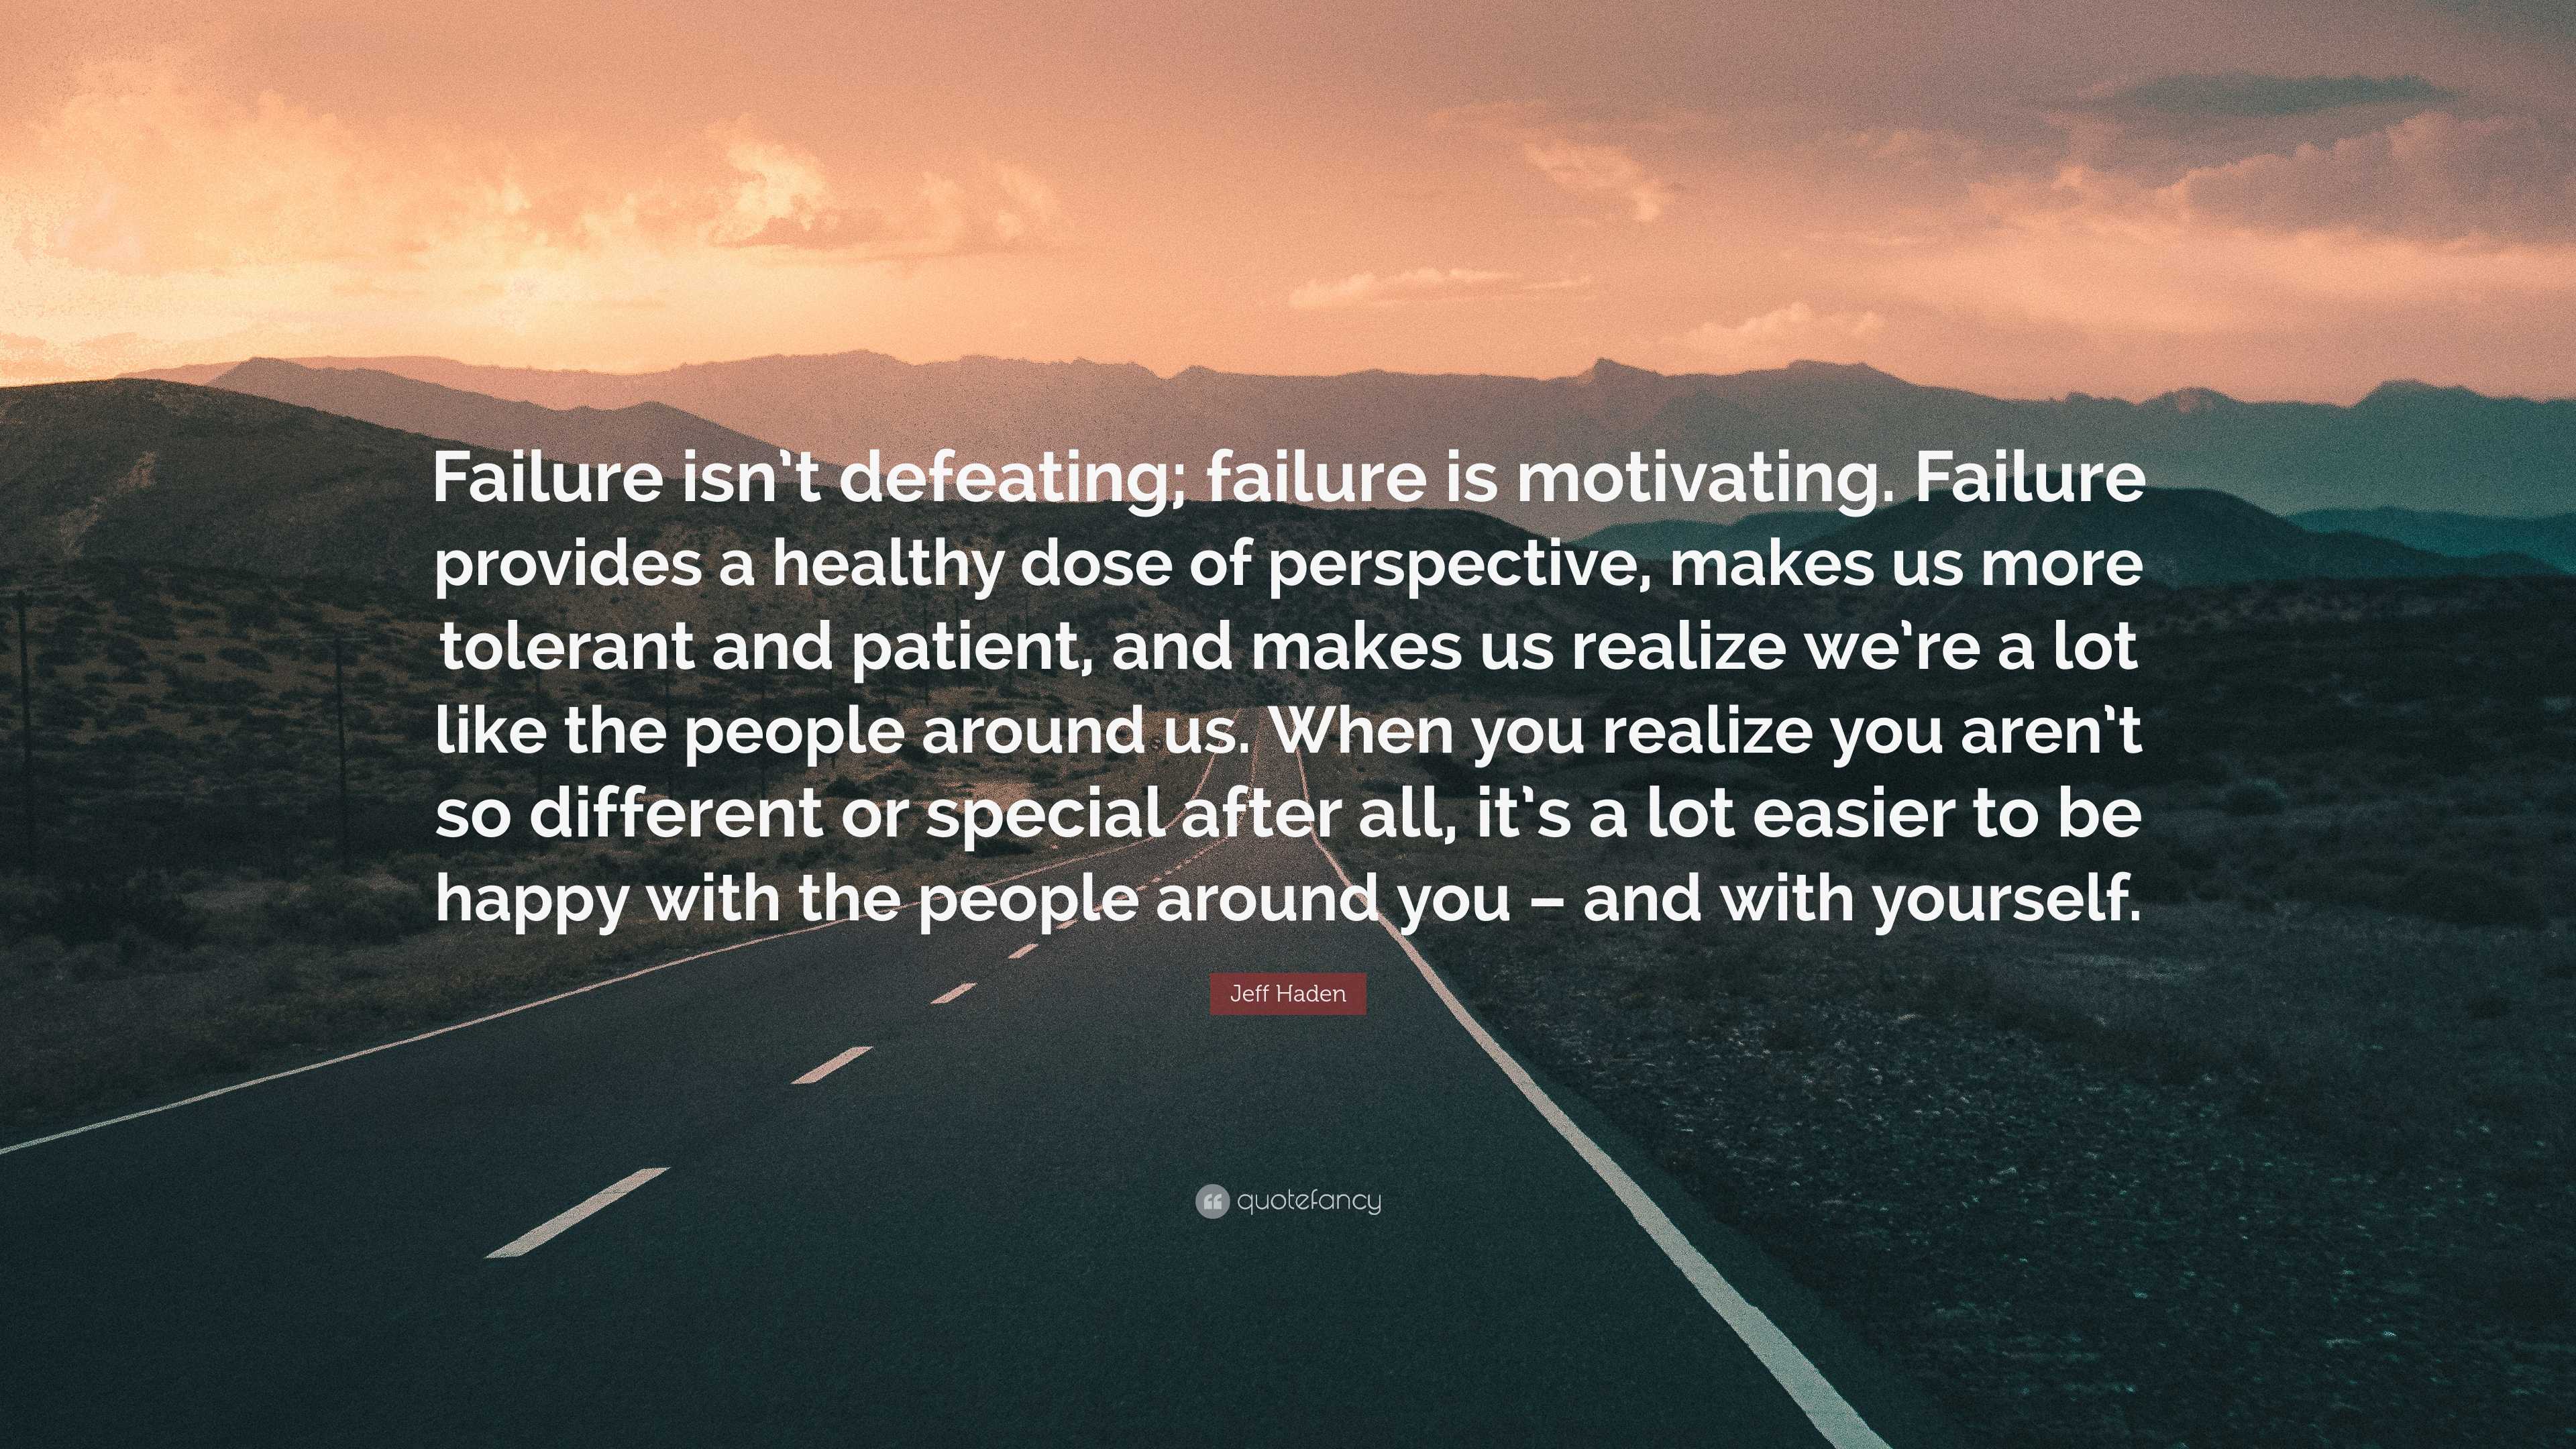 Jeff Haden Quote: “Failure isn’t defeating; failure is motivating ...